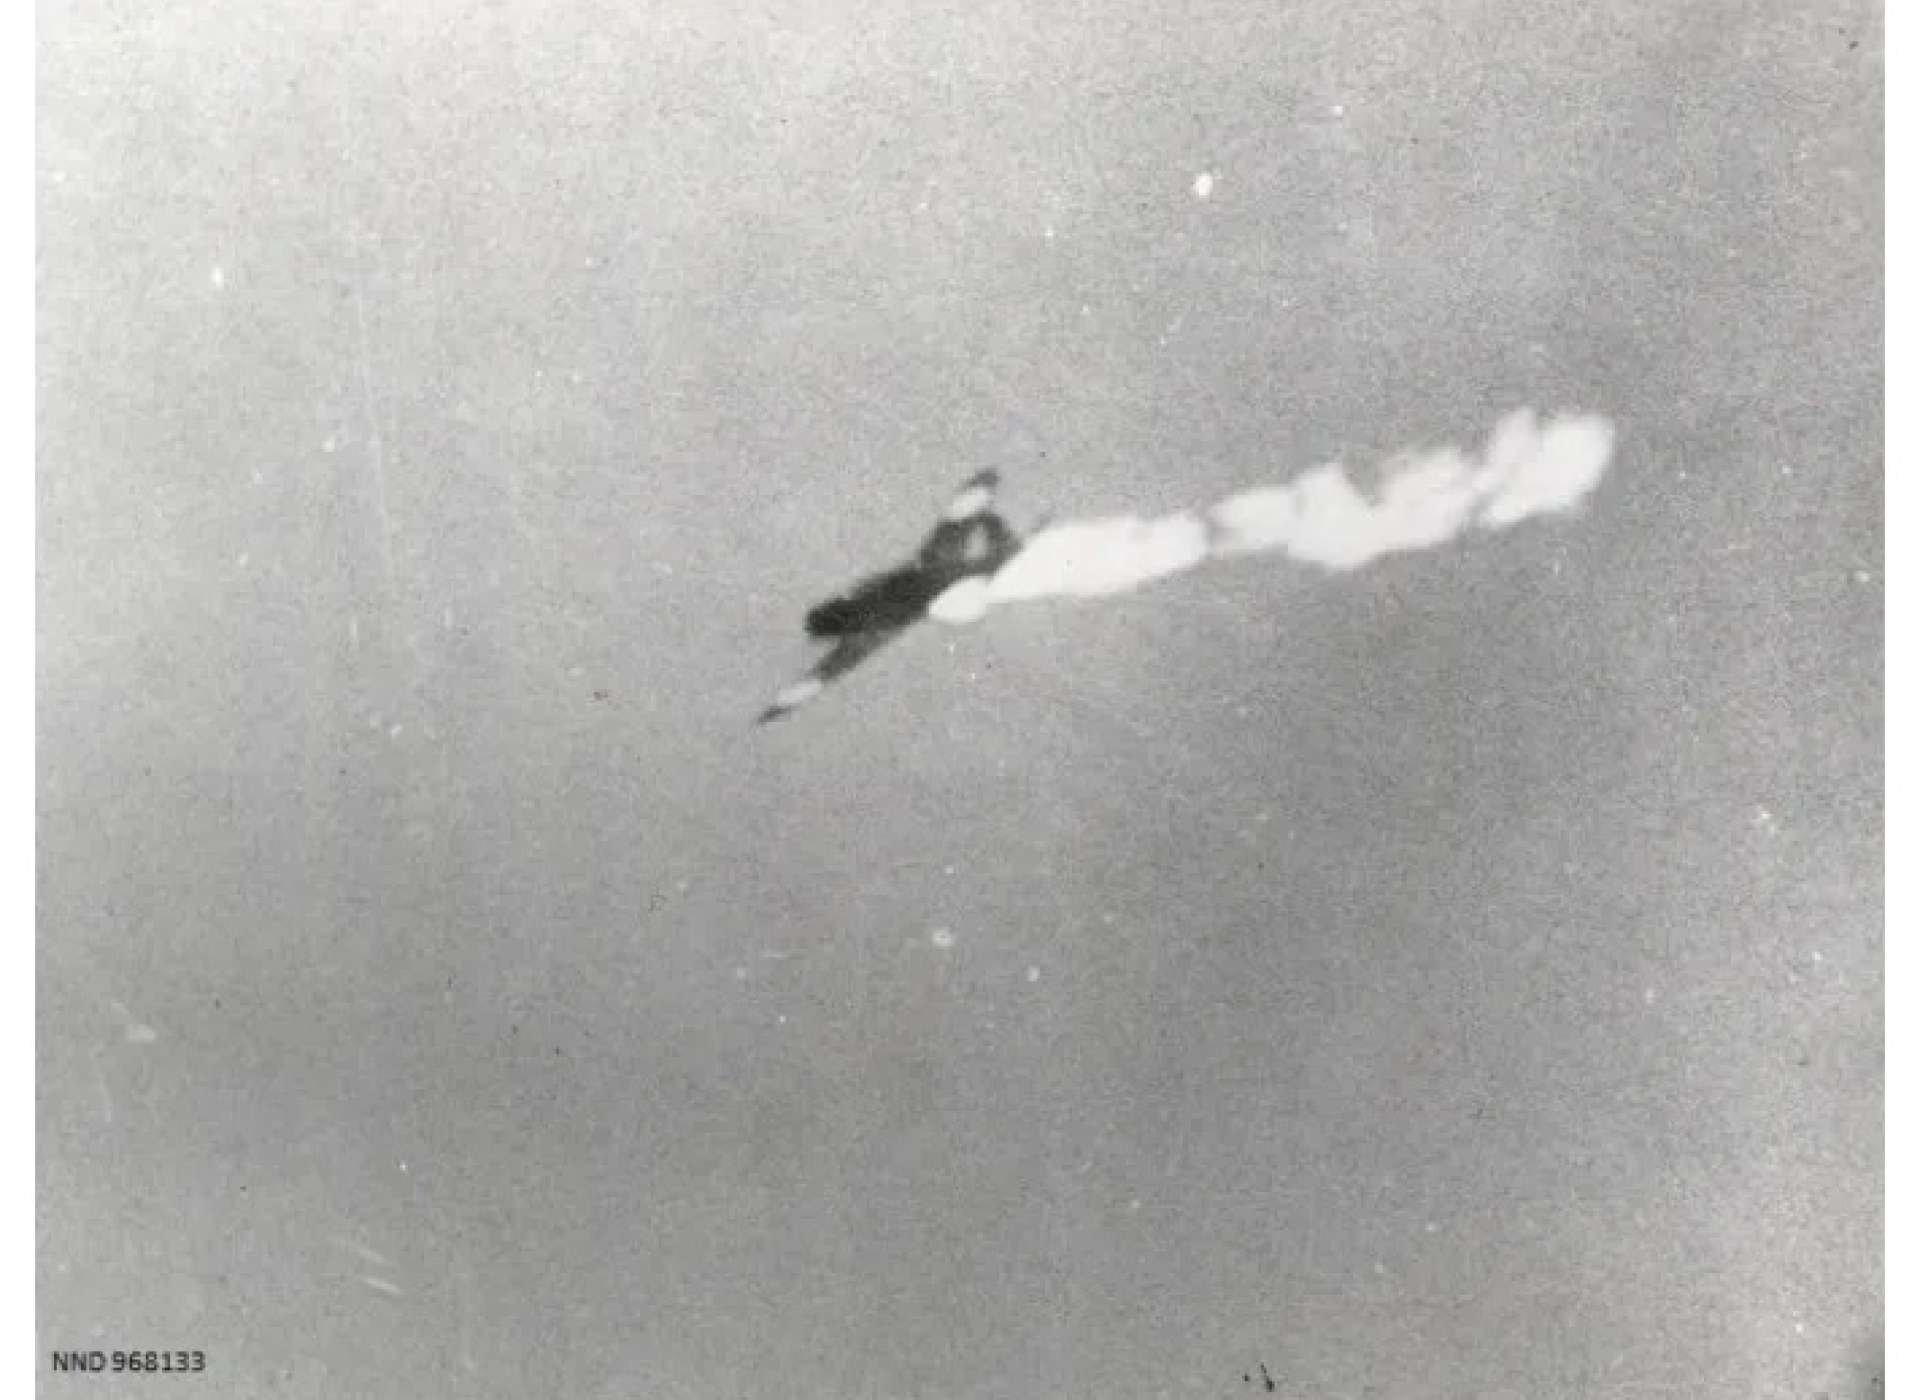 Japanese airplane after being hit by American fire. Photo courtesy of the National Archives and Records Administration.